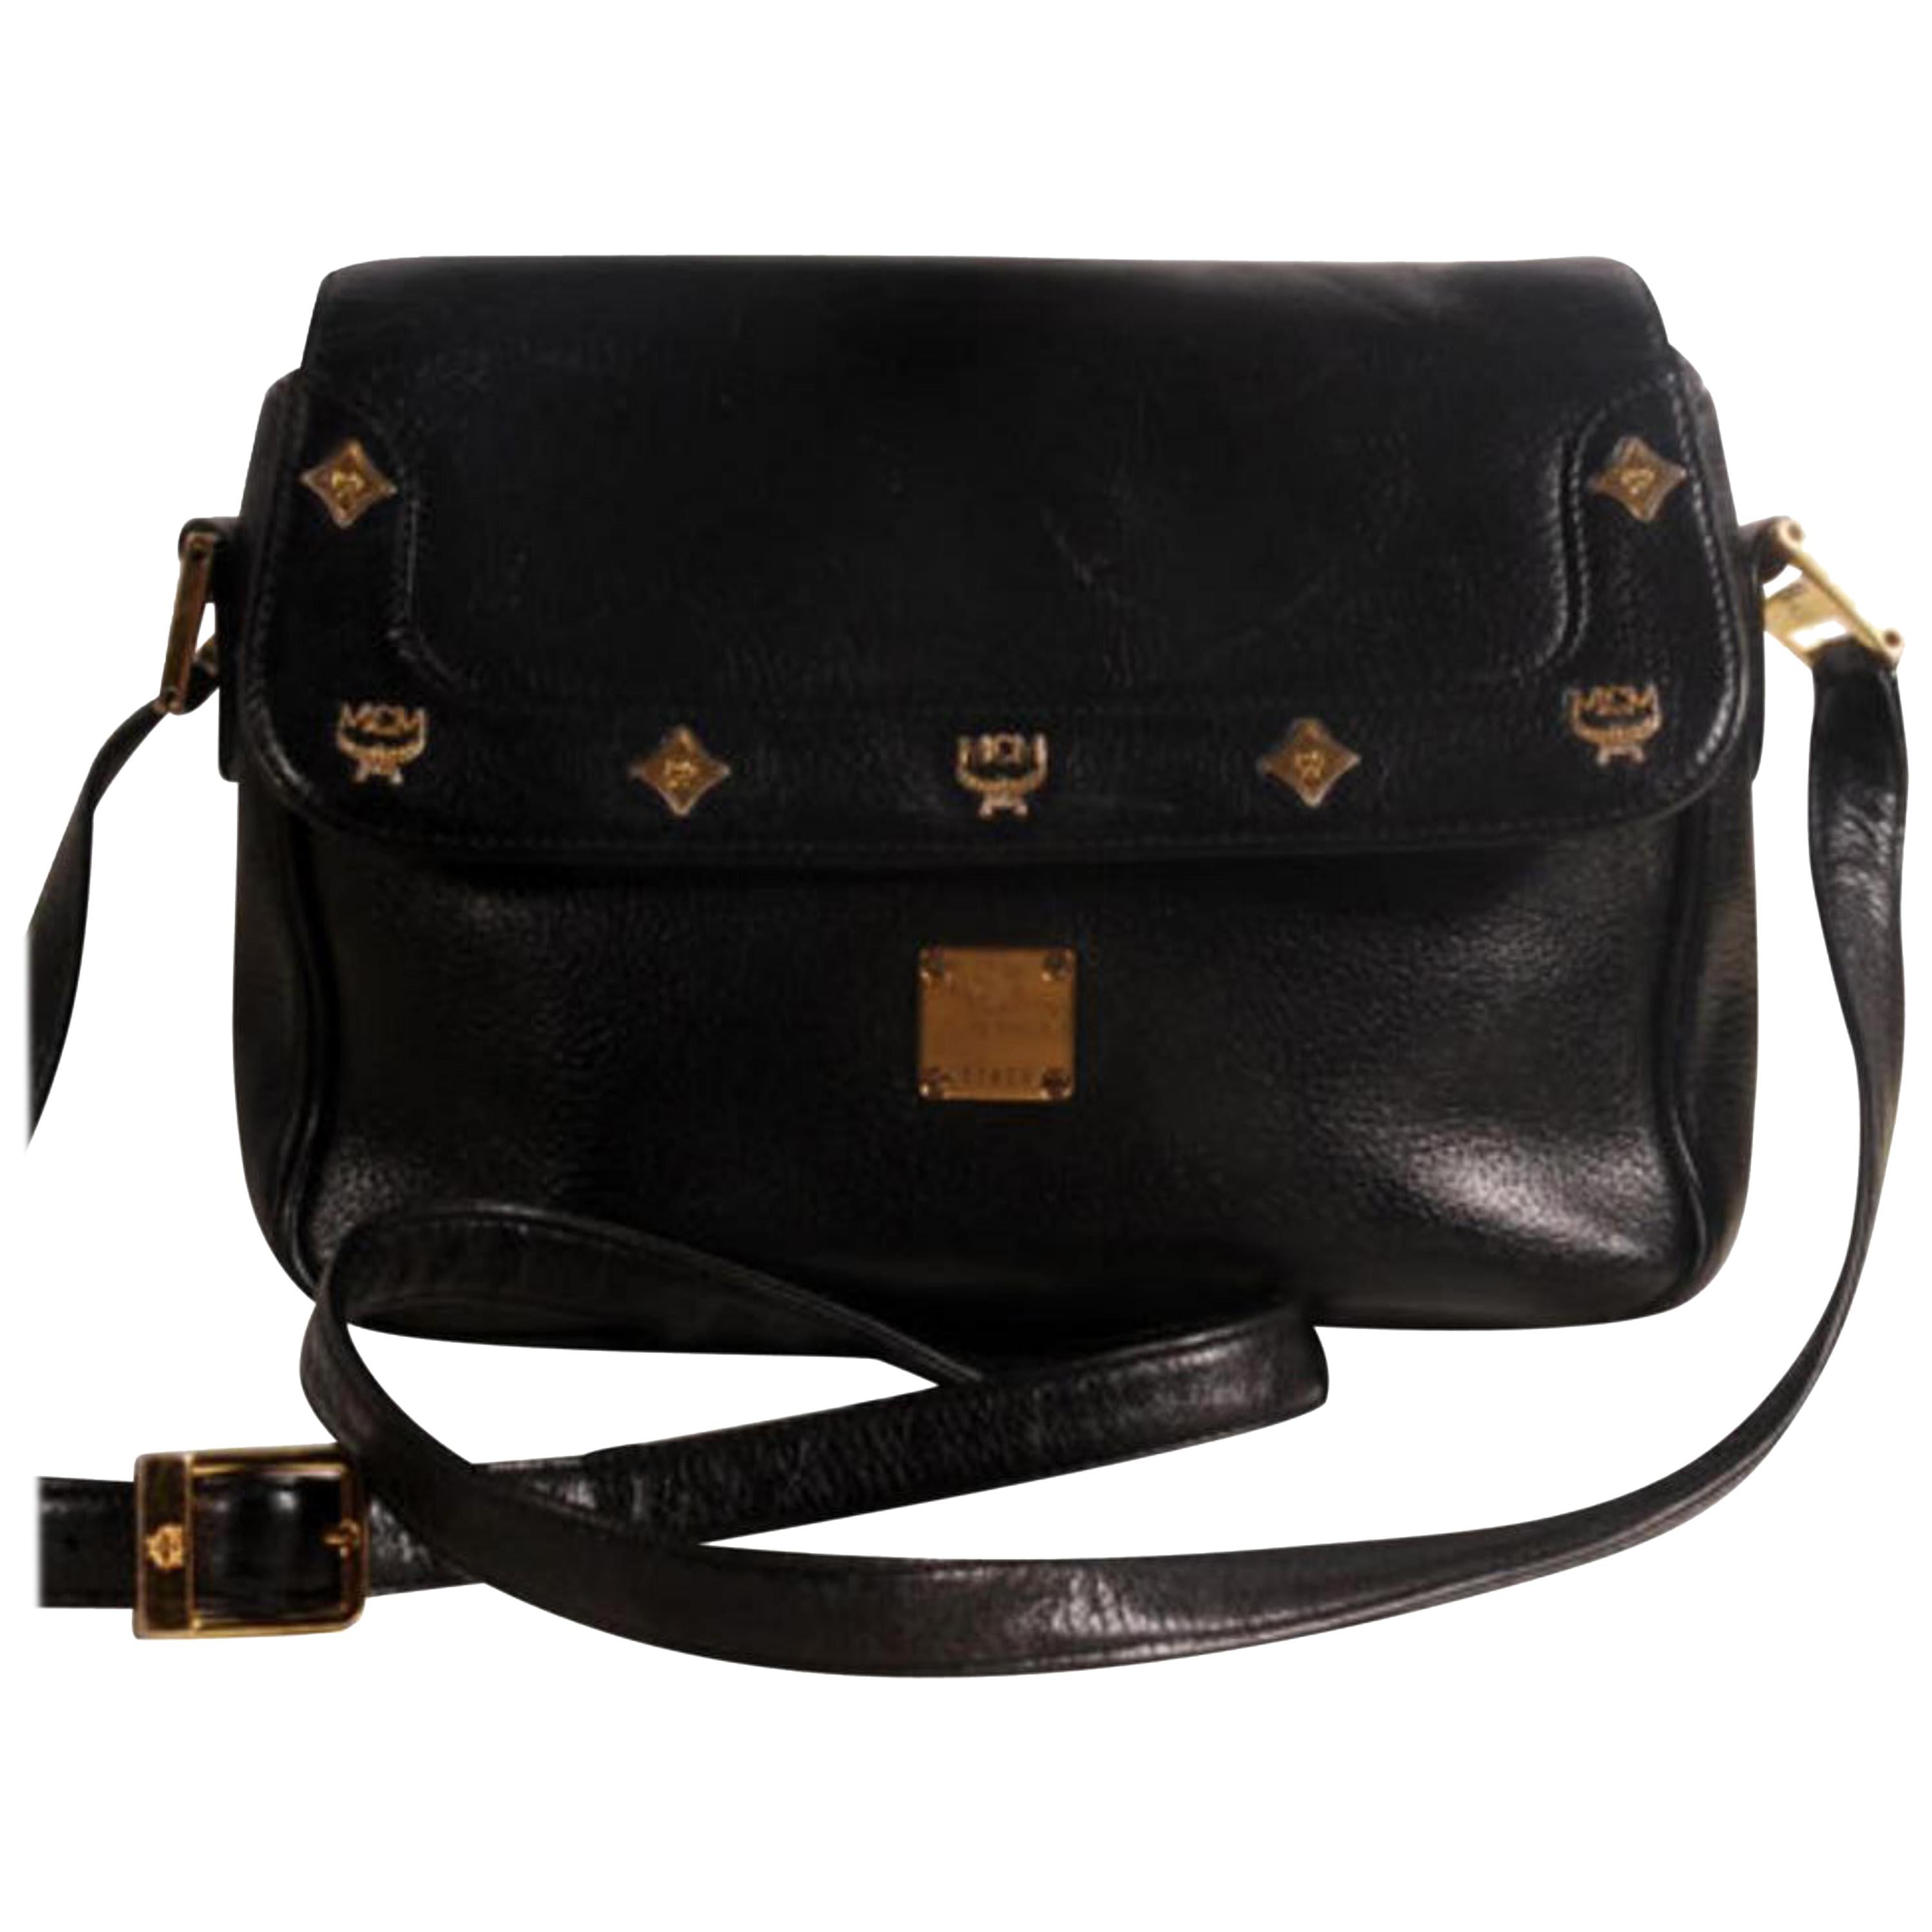 MCM Studded Camera Flap 869445 Black Leather Cross Body Bag For